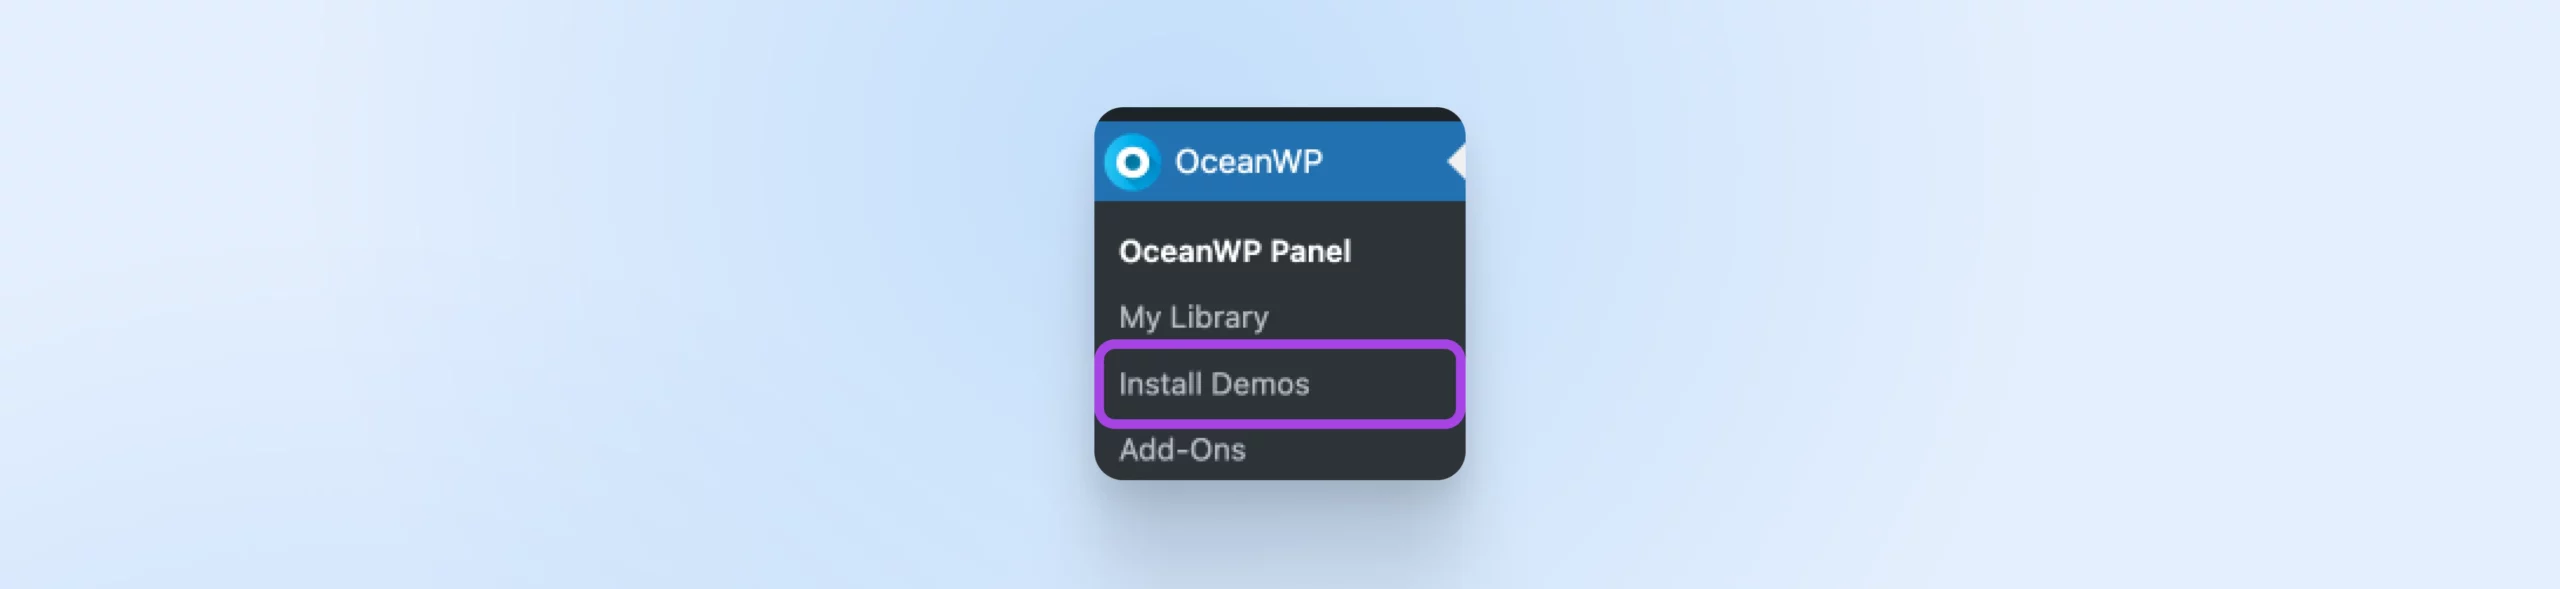 OceanWP drop-down menu with the button "Install Demos" selected.